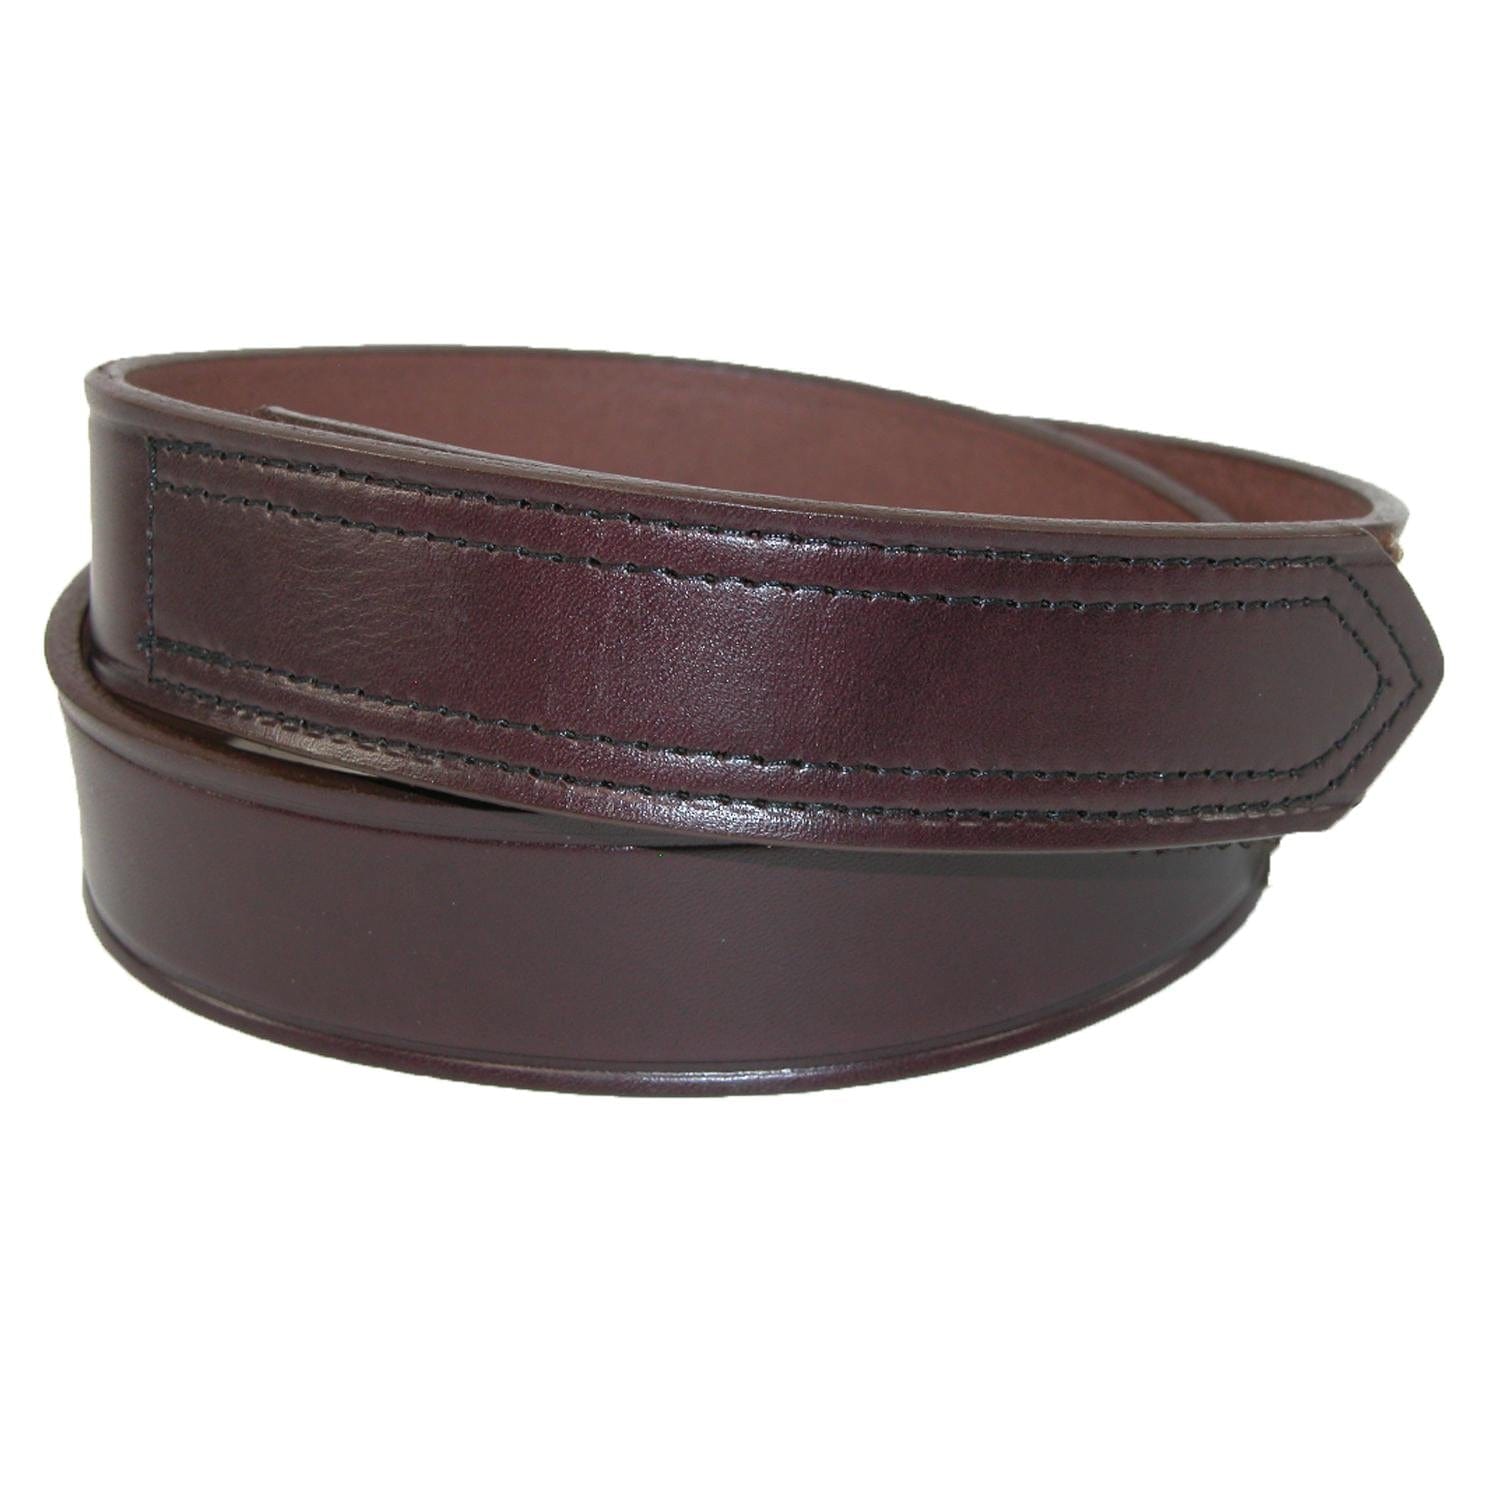 Buy KEECOW Men's 100% Italian Cow Leather Belt Men With Anti-Scratch  Buckle,Packed in a Box, Brown-1008, 34-38 at